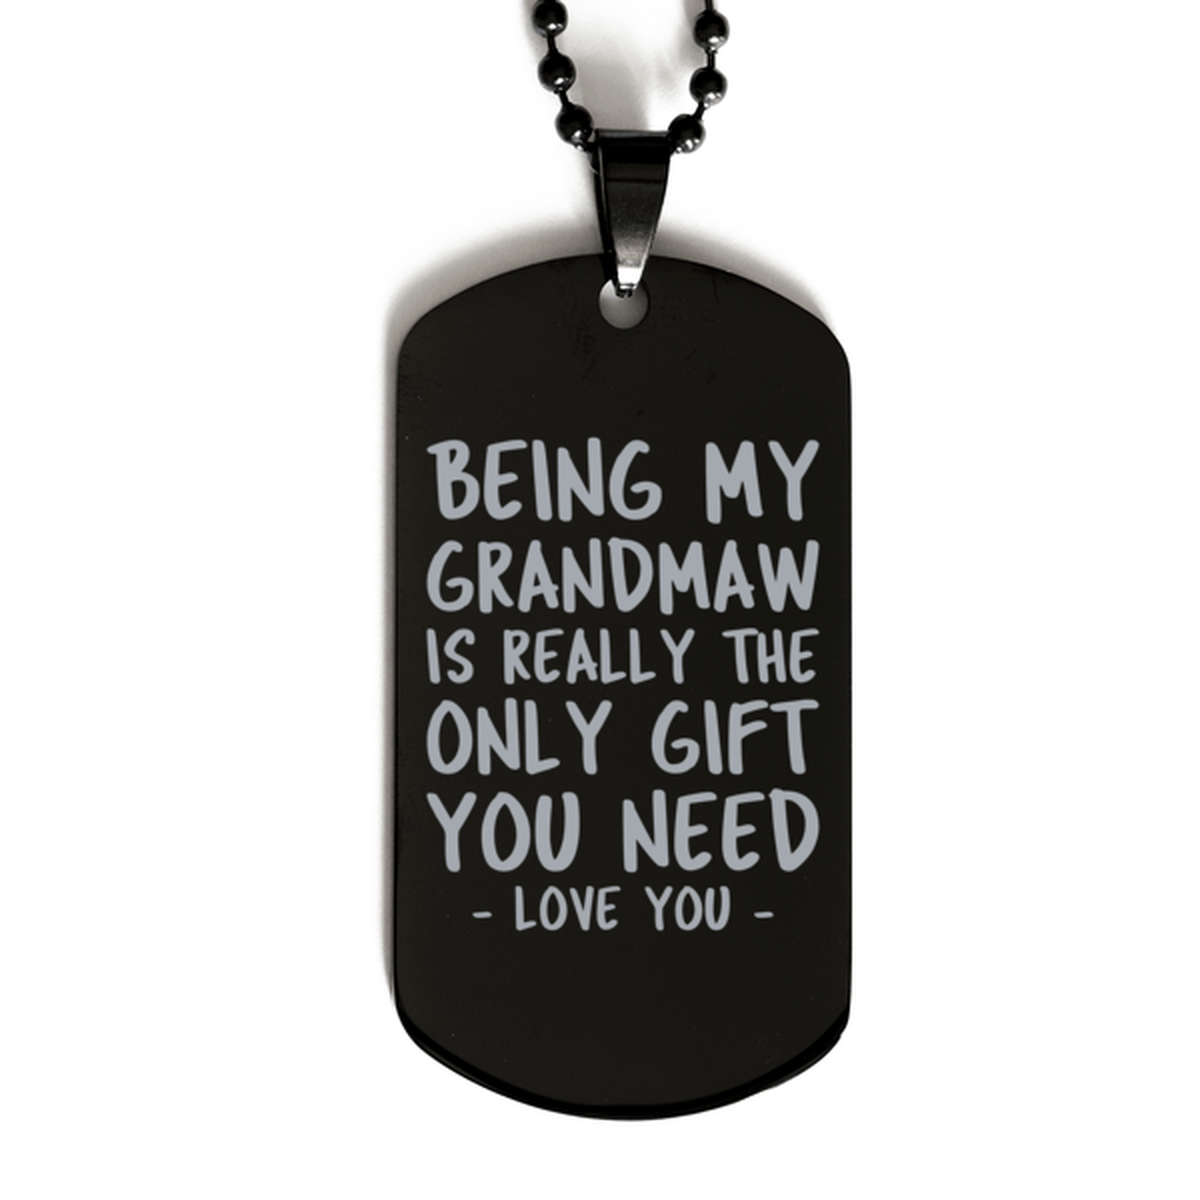 Funny Grandmaw Black Dog Tag Necklace, Being My Grandmaw Is Really the Only Gift You Need, Best Birthday Gifts for Grandmaw